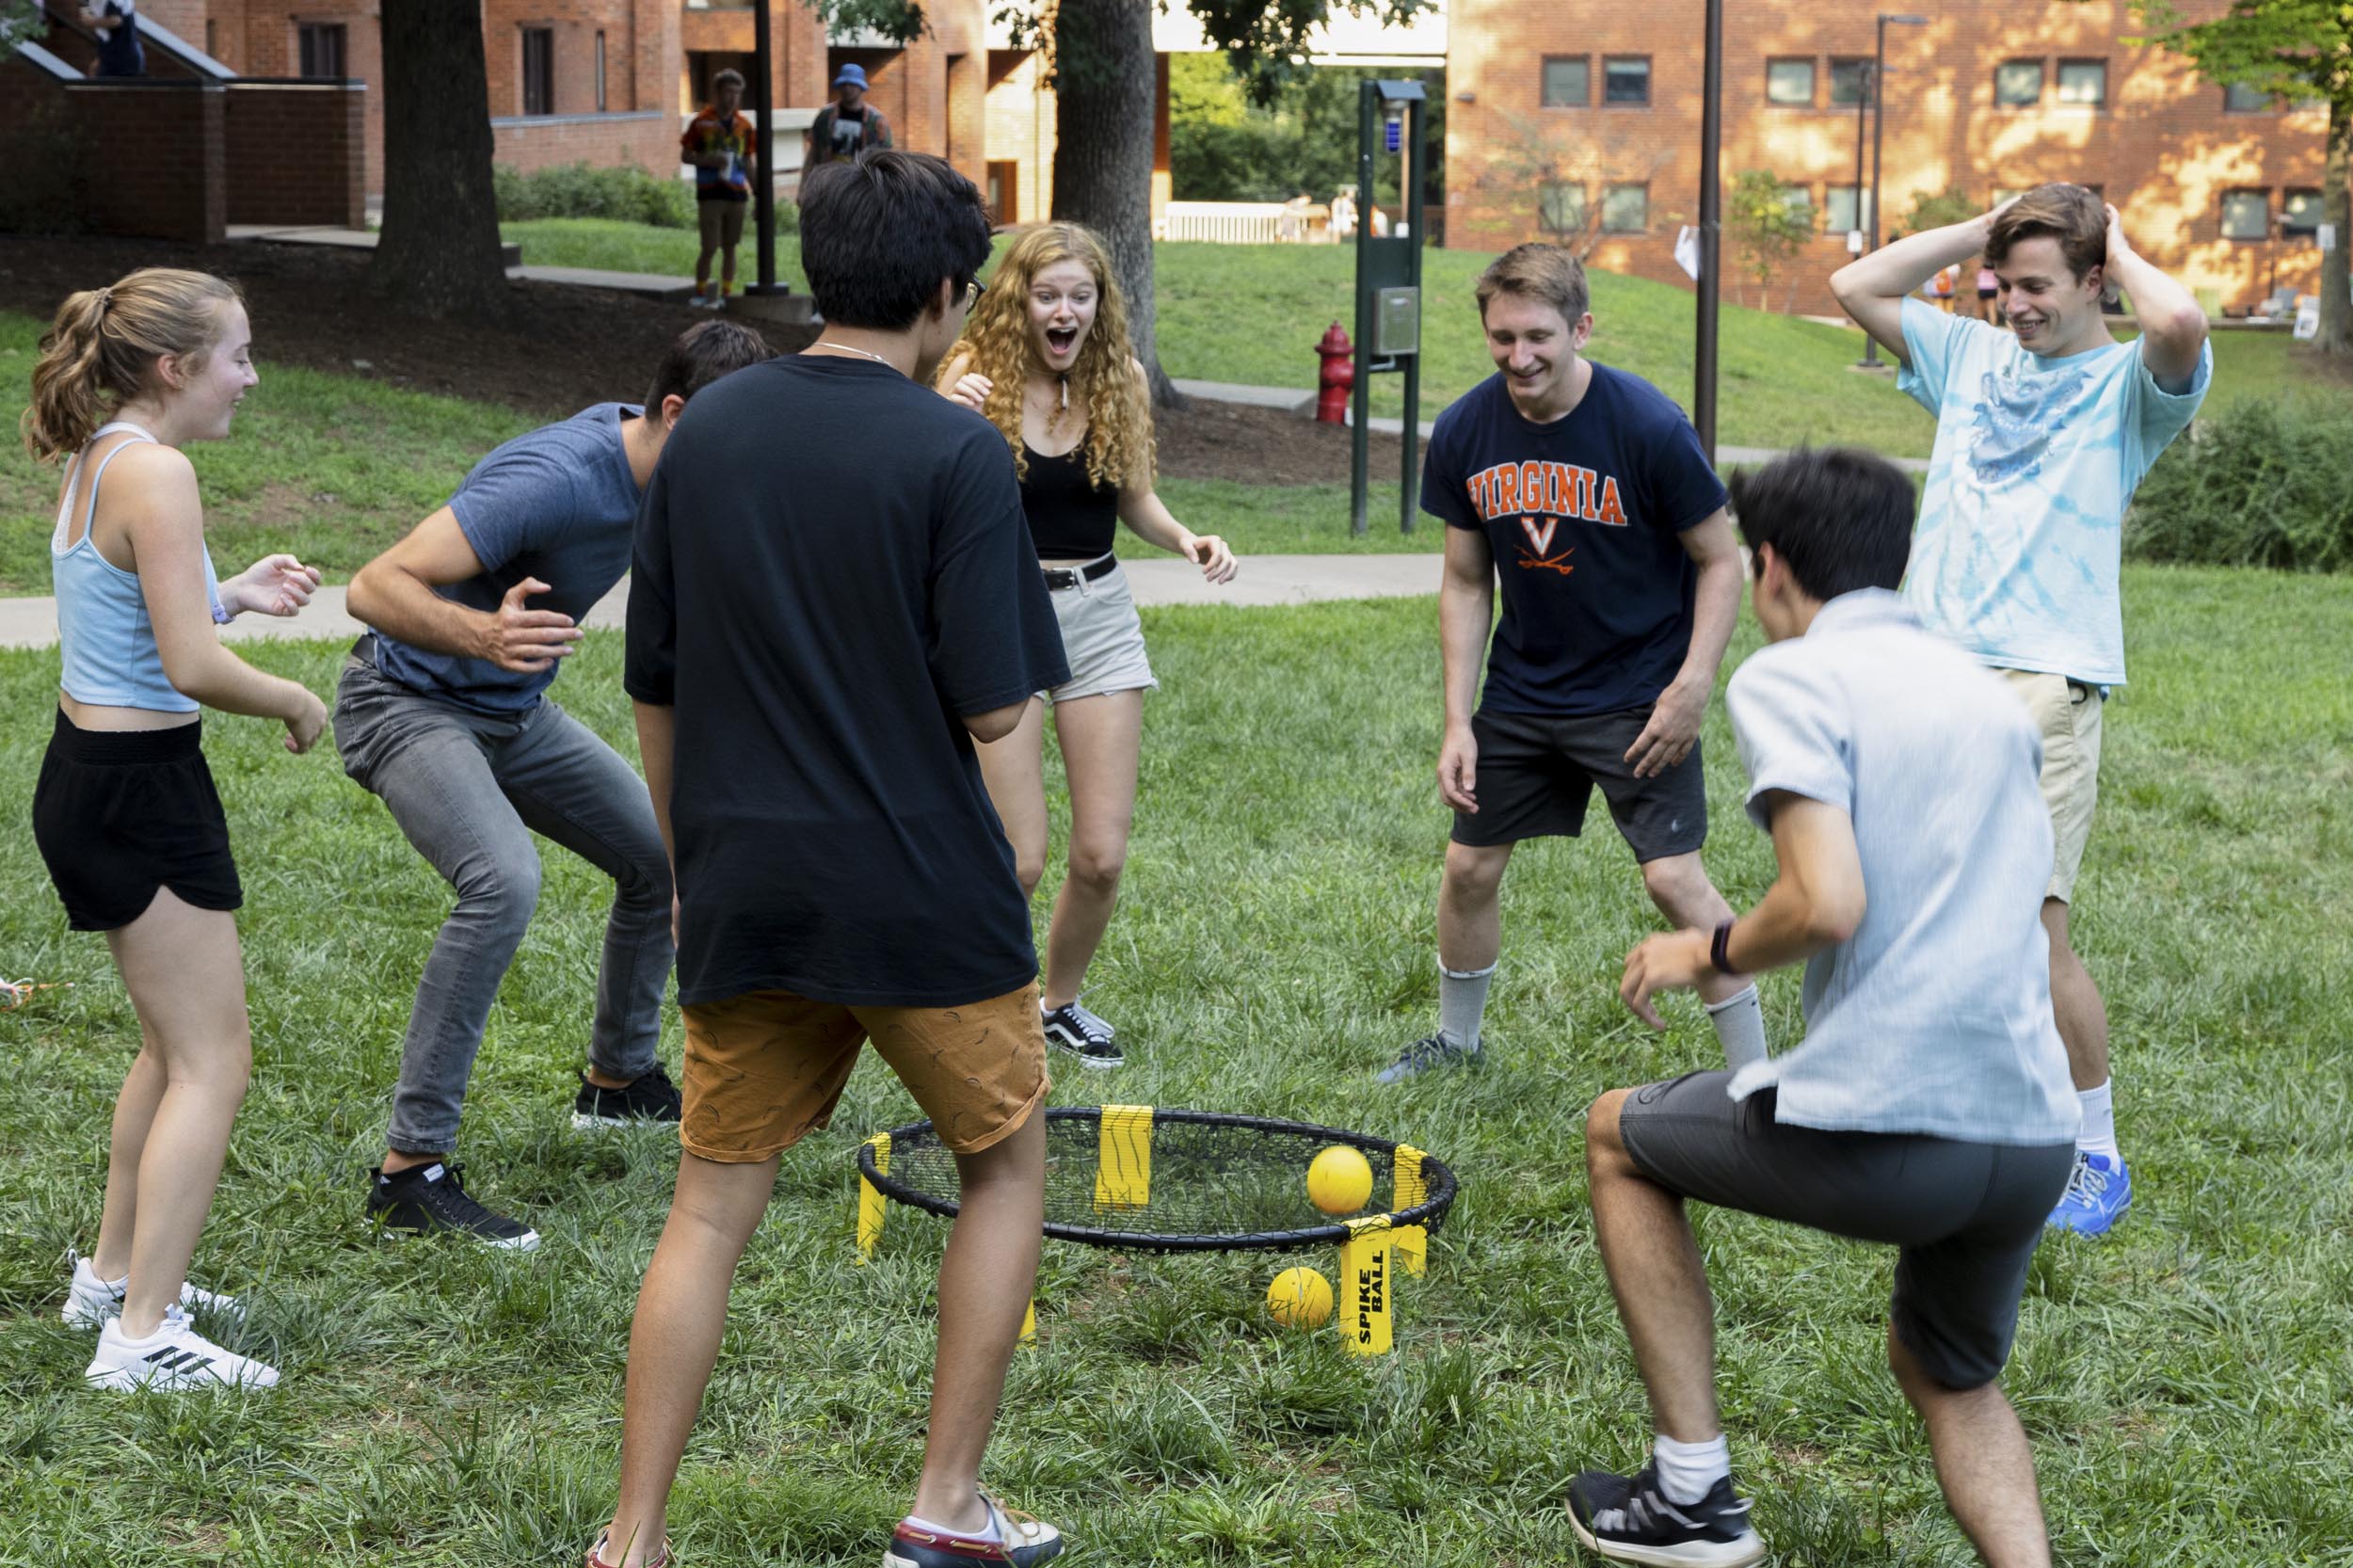 Group of students playing Spike ball outside in the grass together